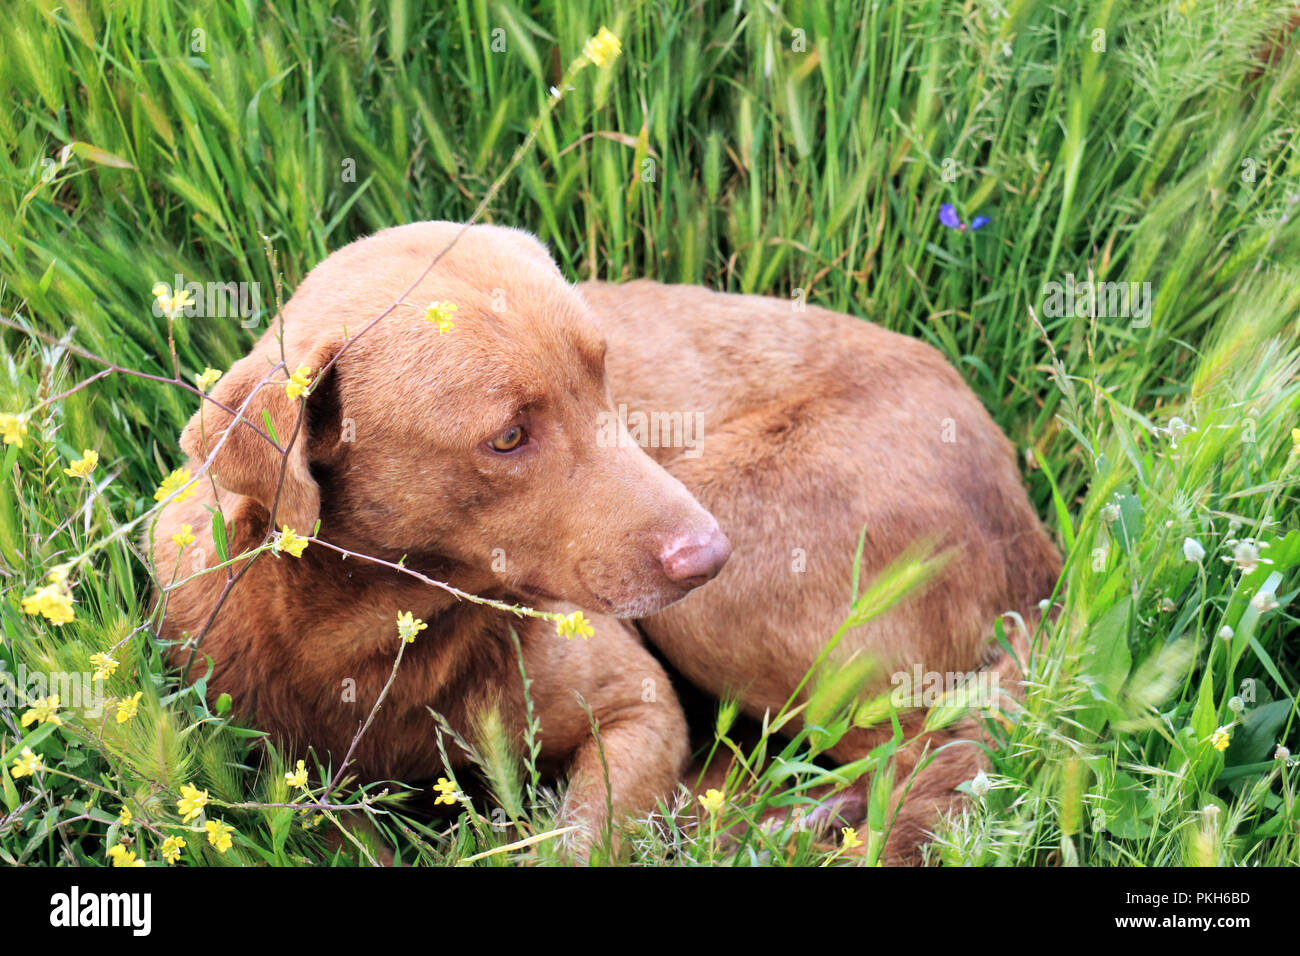 Dog in the field lying among flowers Stock Photo